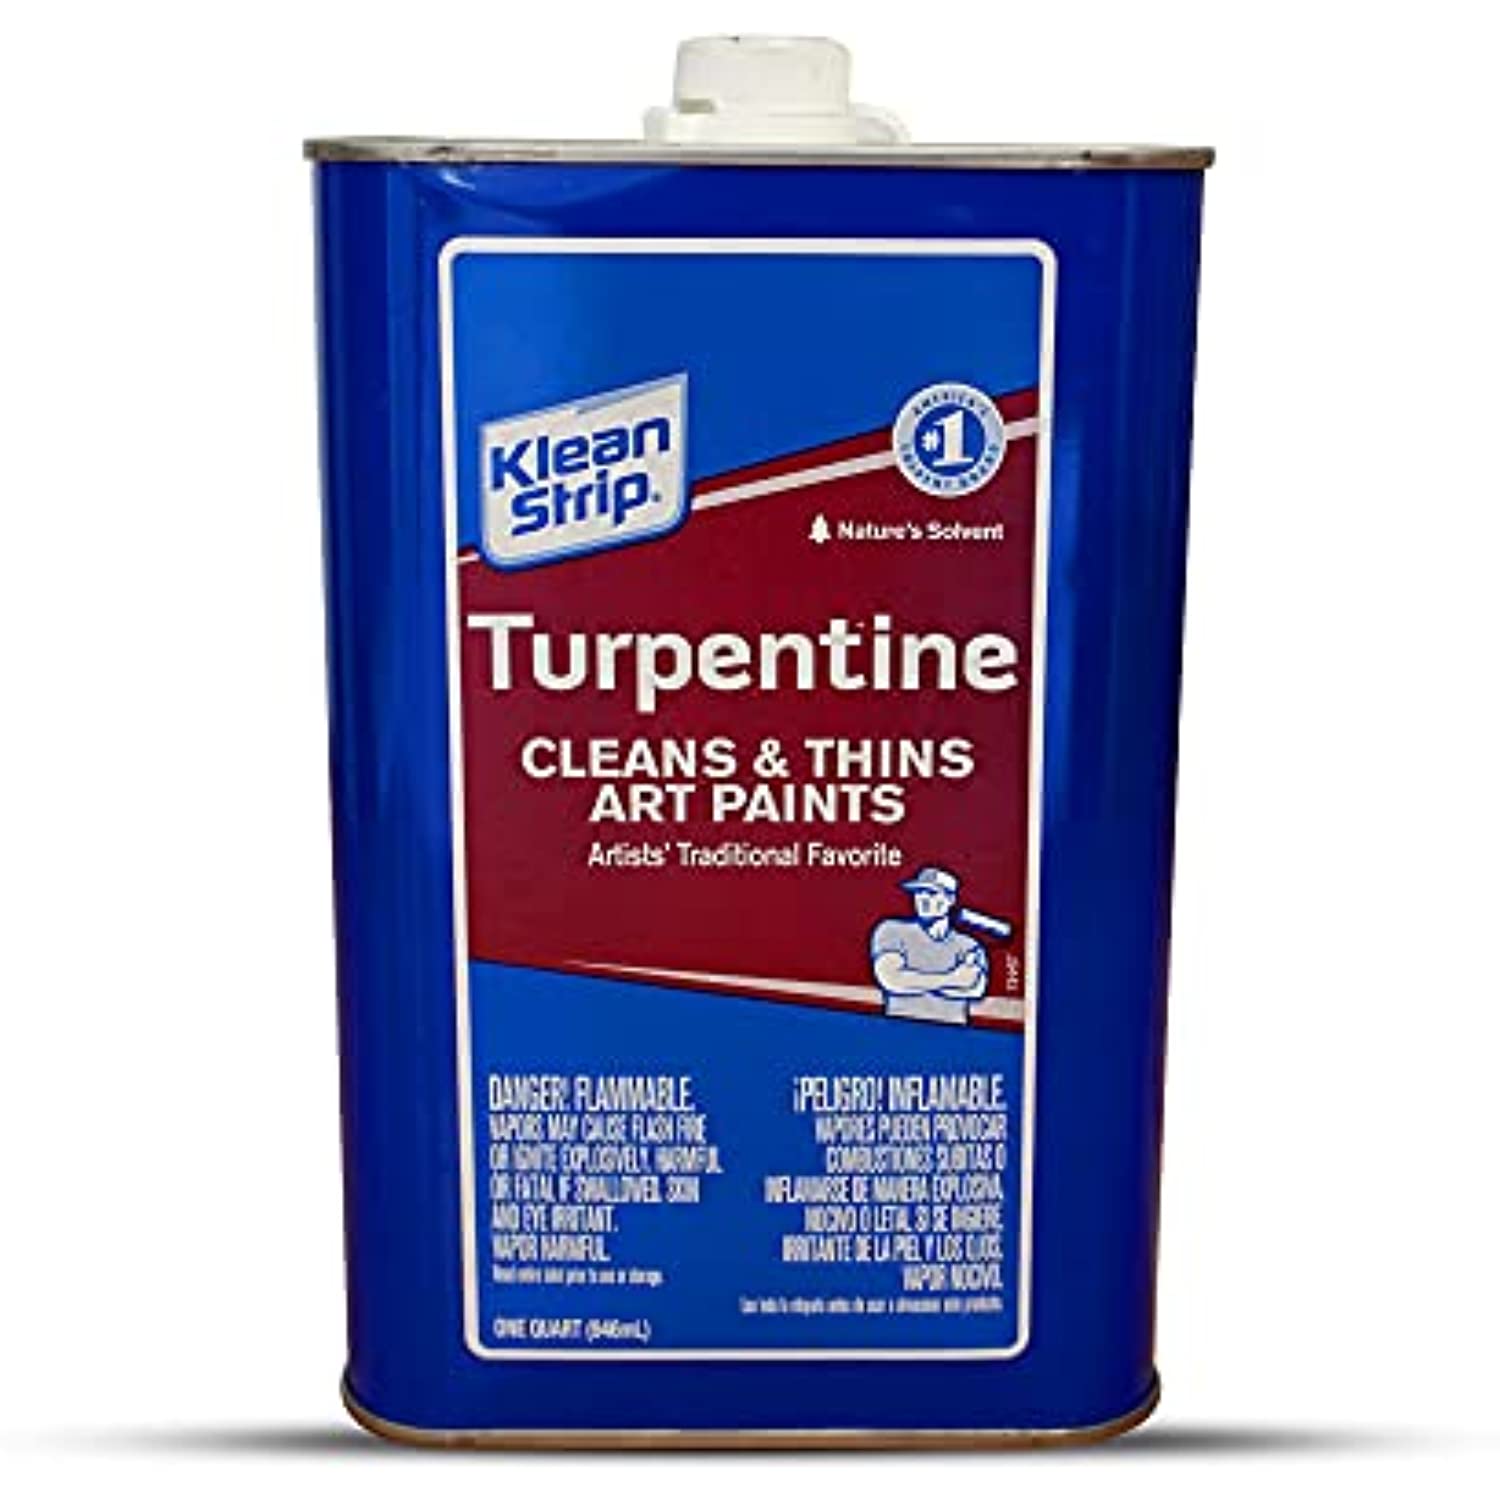 Klean Strip Turpentine 1- Quart Degreaser Tools Parts Machinery Wood Stains Thins Art Paints Dry Faster Less Toxic High Solvency Now Comes with Chemical Resistant Gloves by Centaurus AZ